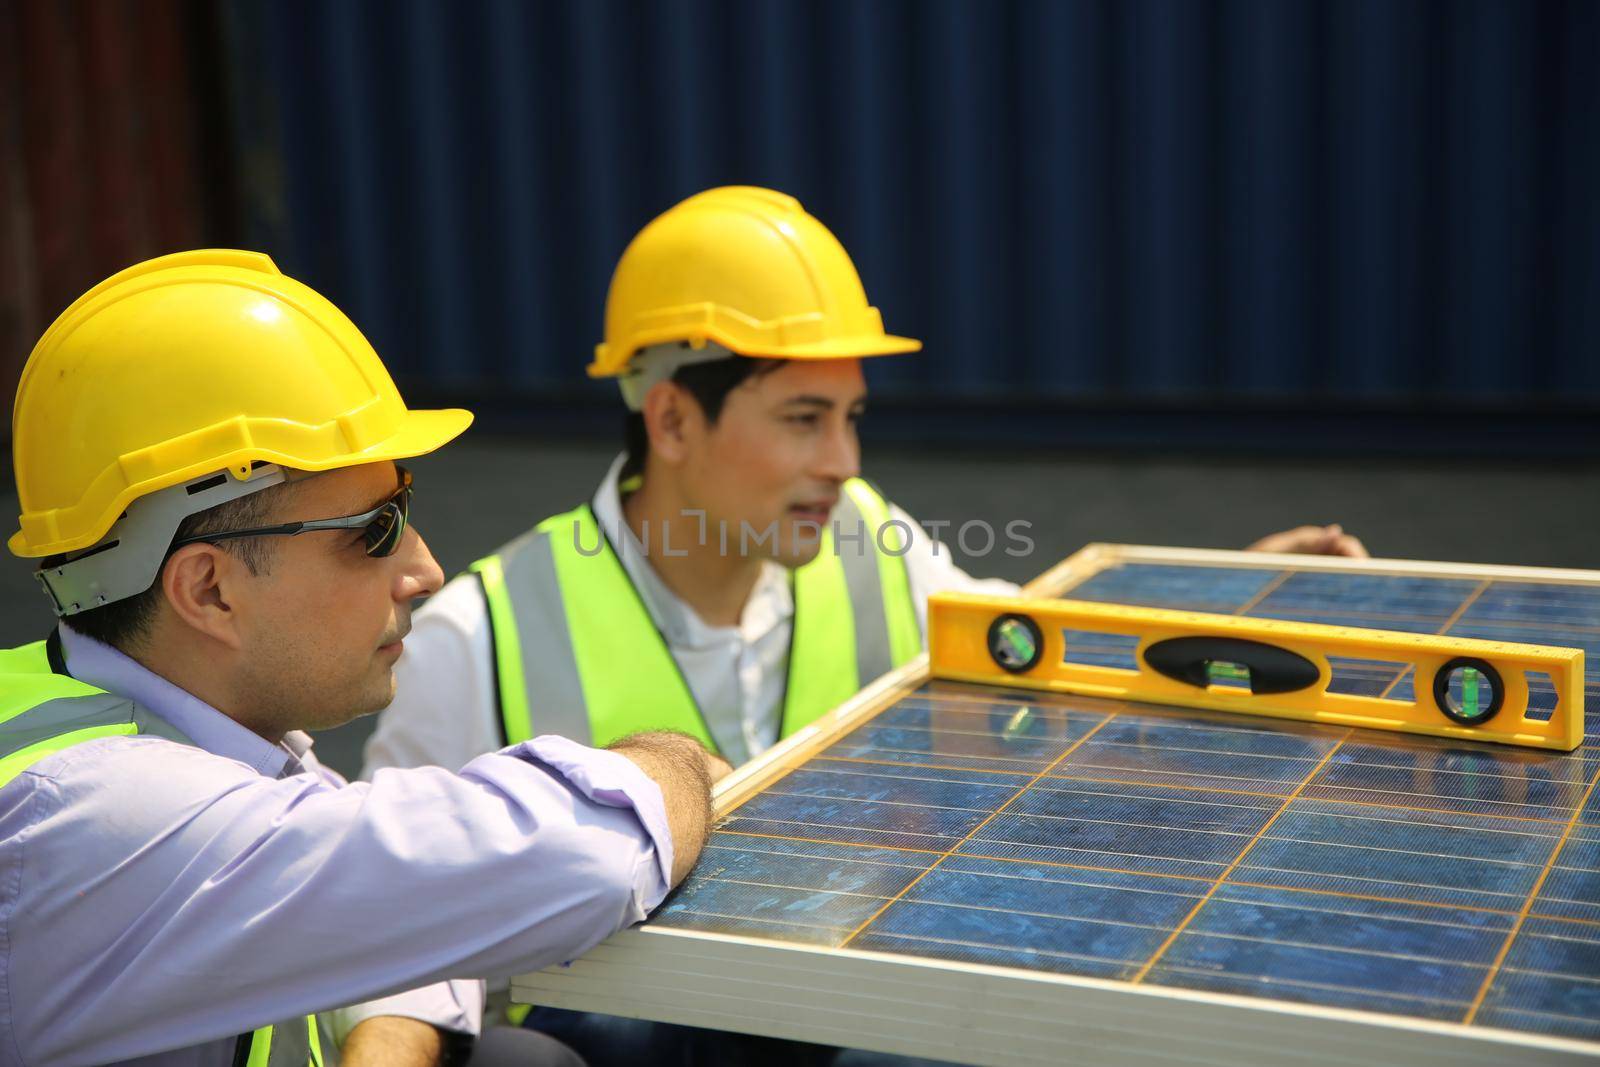 technicians install panels Solar cells to produce and distribute electricity. Energy technology concept by chuanchai